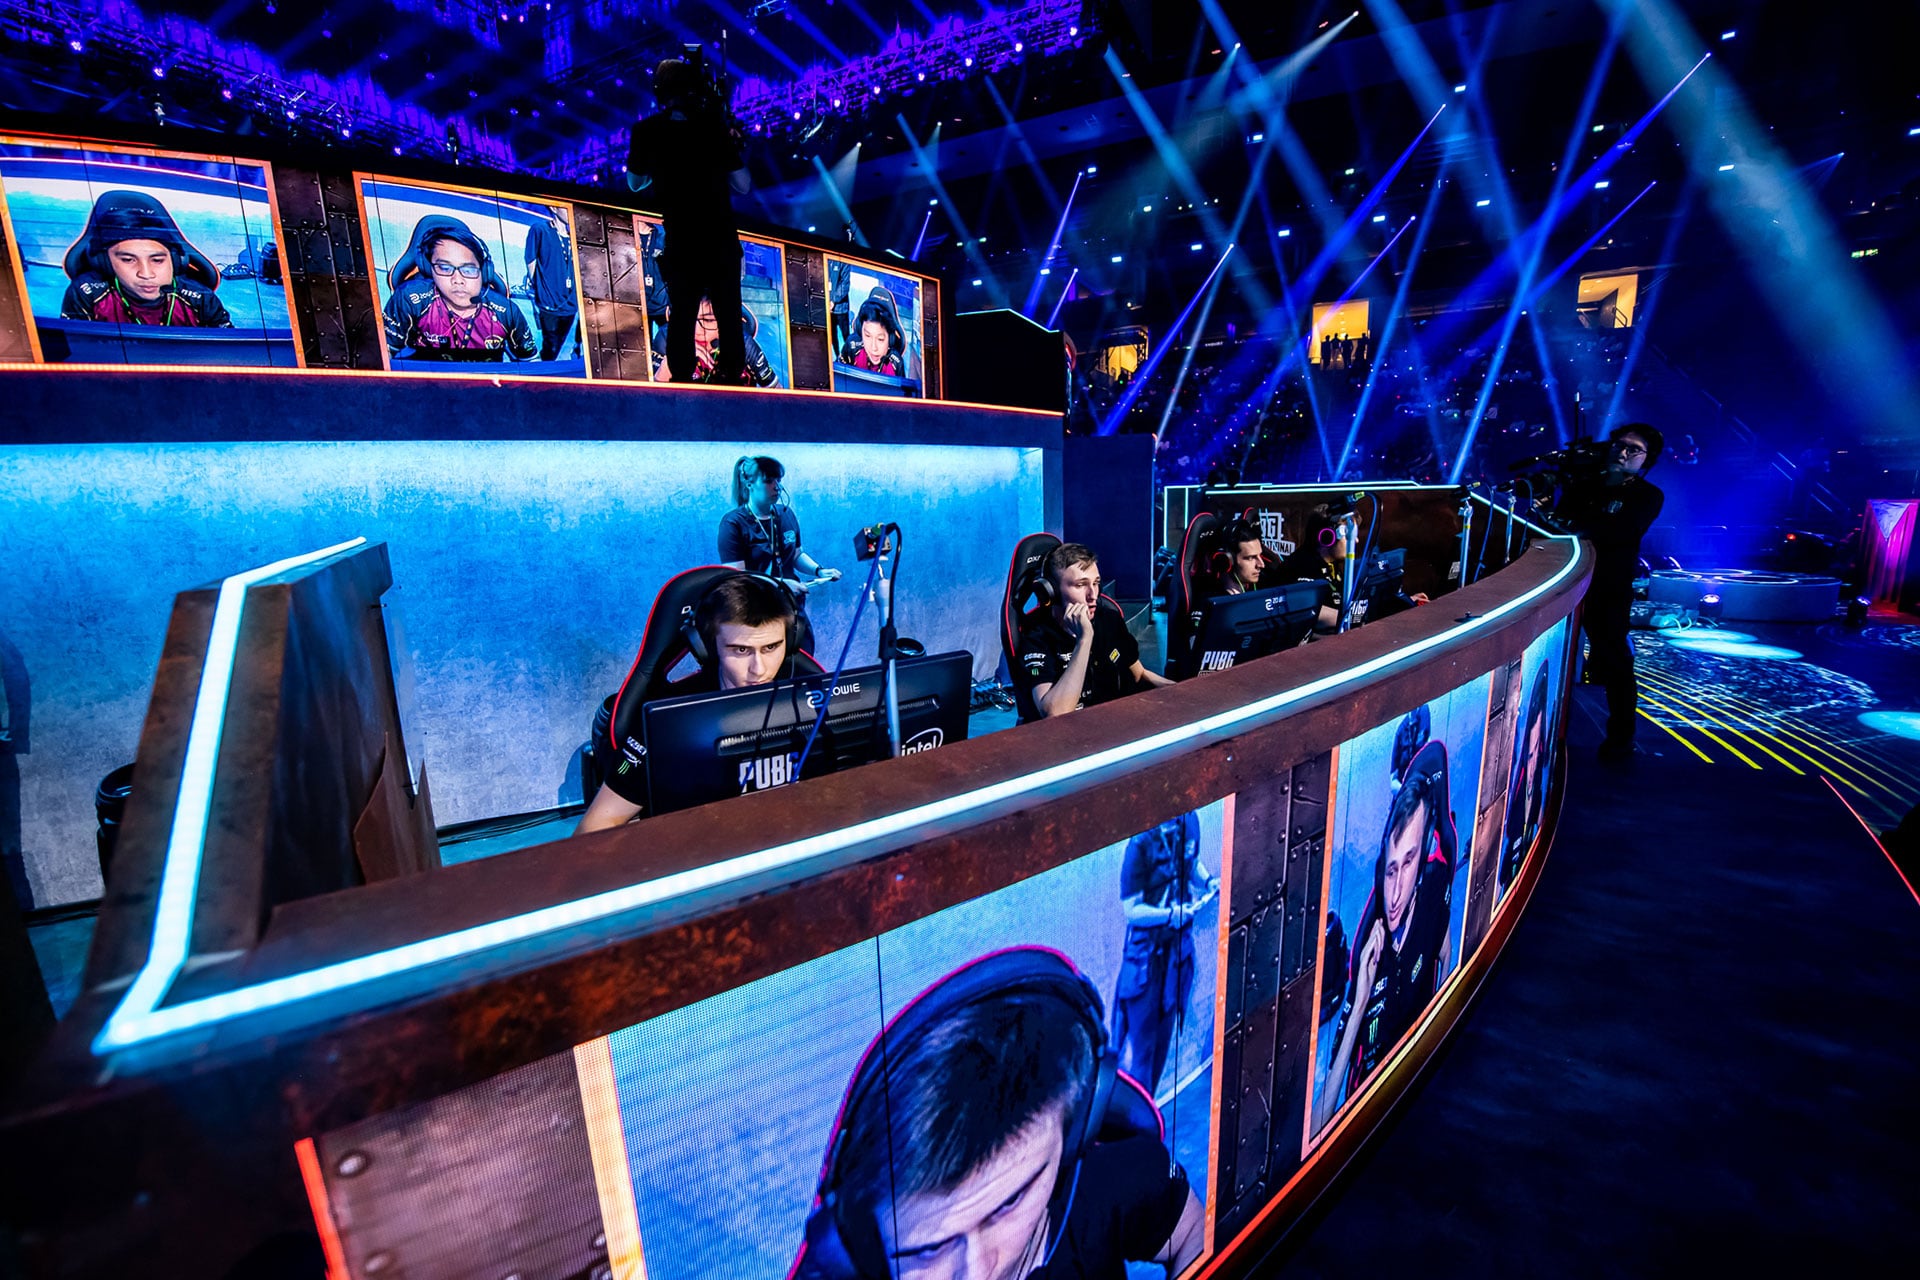 Live Legends - IHSE plays Key Role at Esports Gaming event